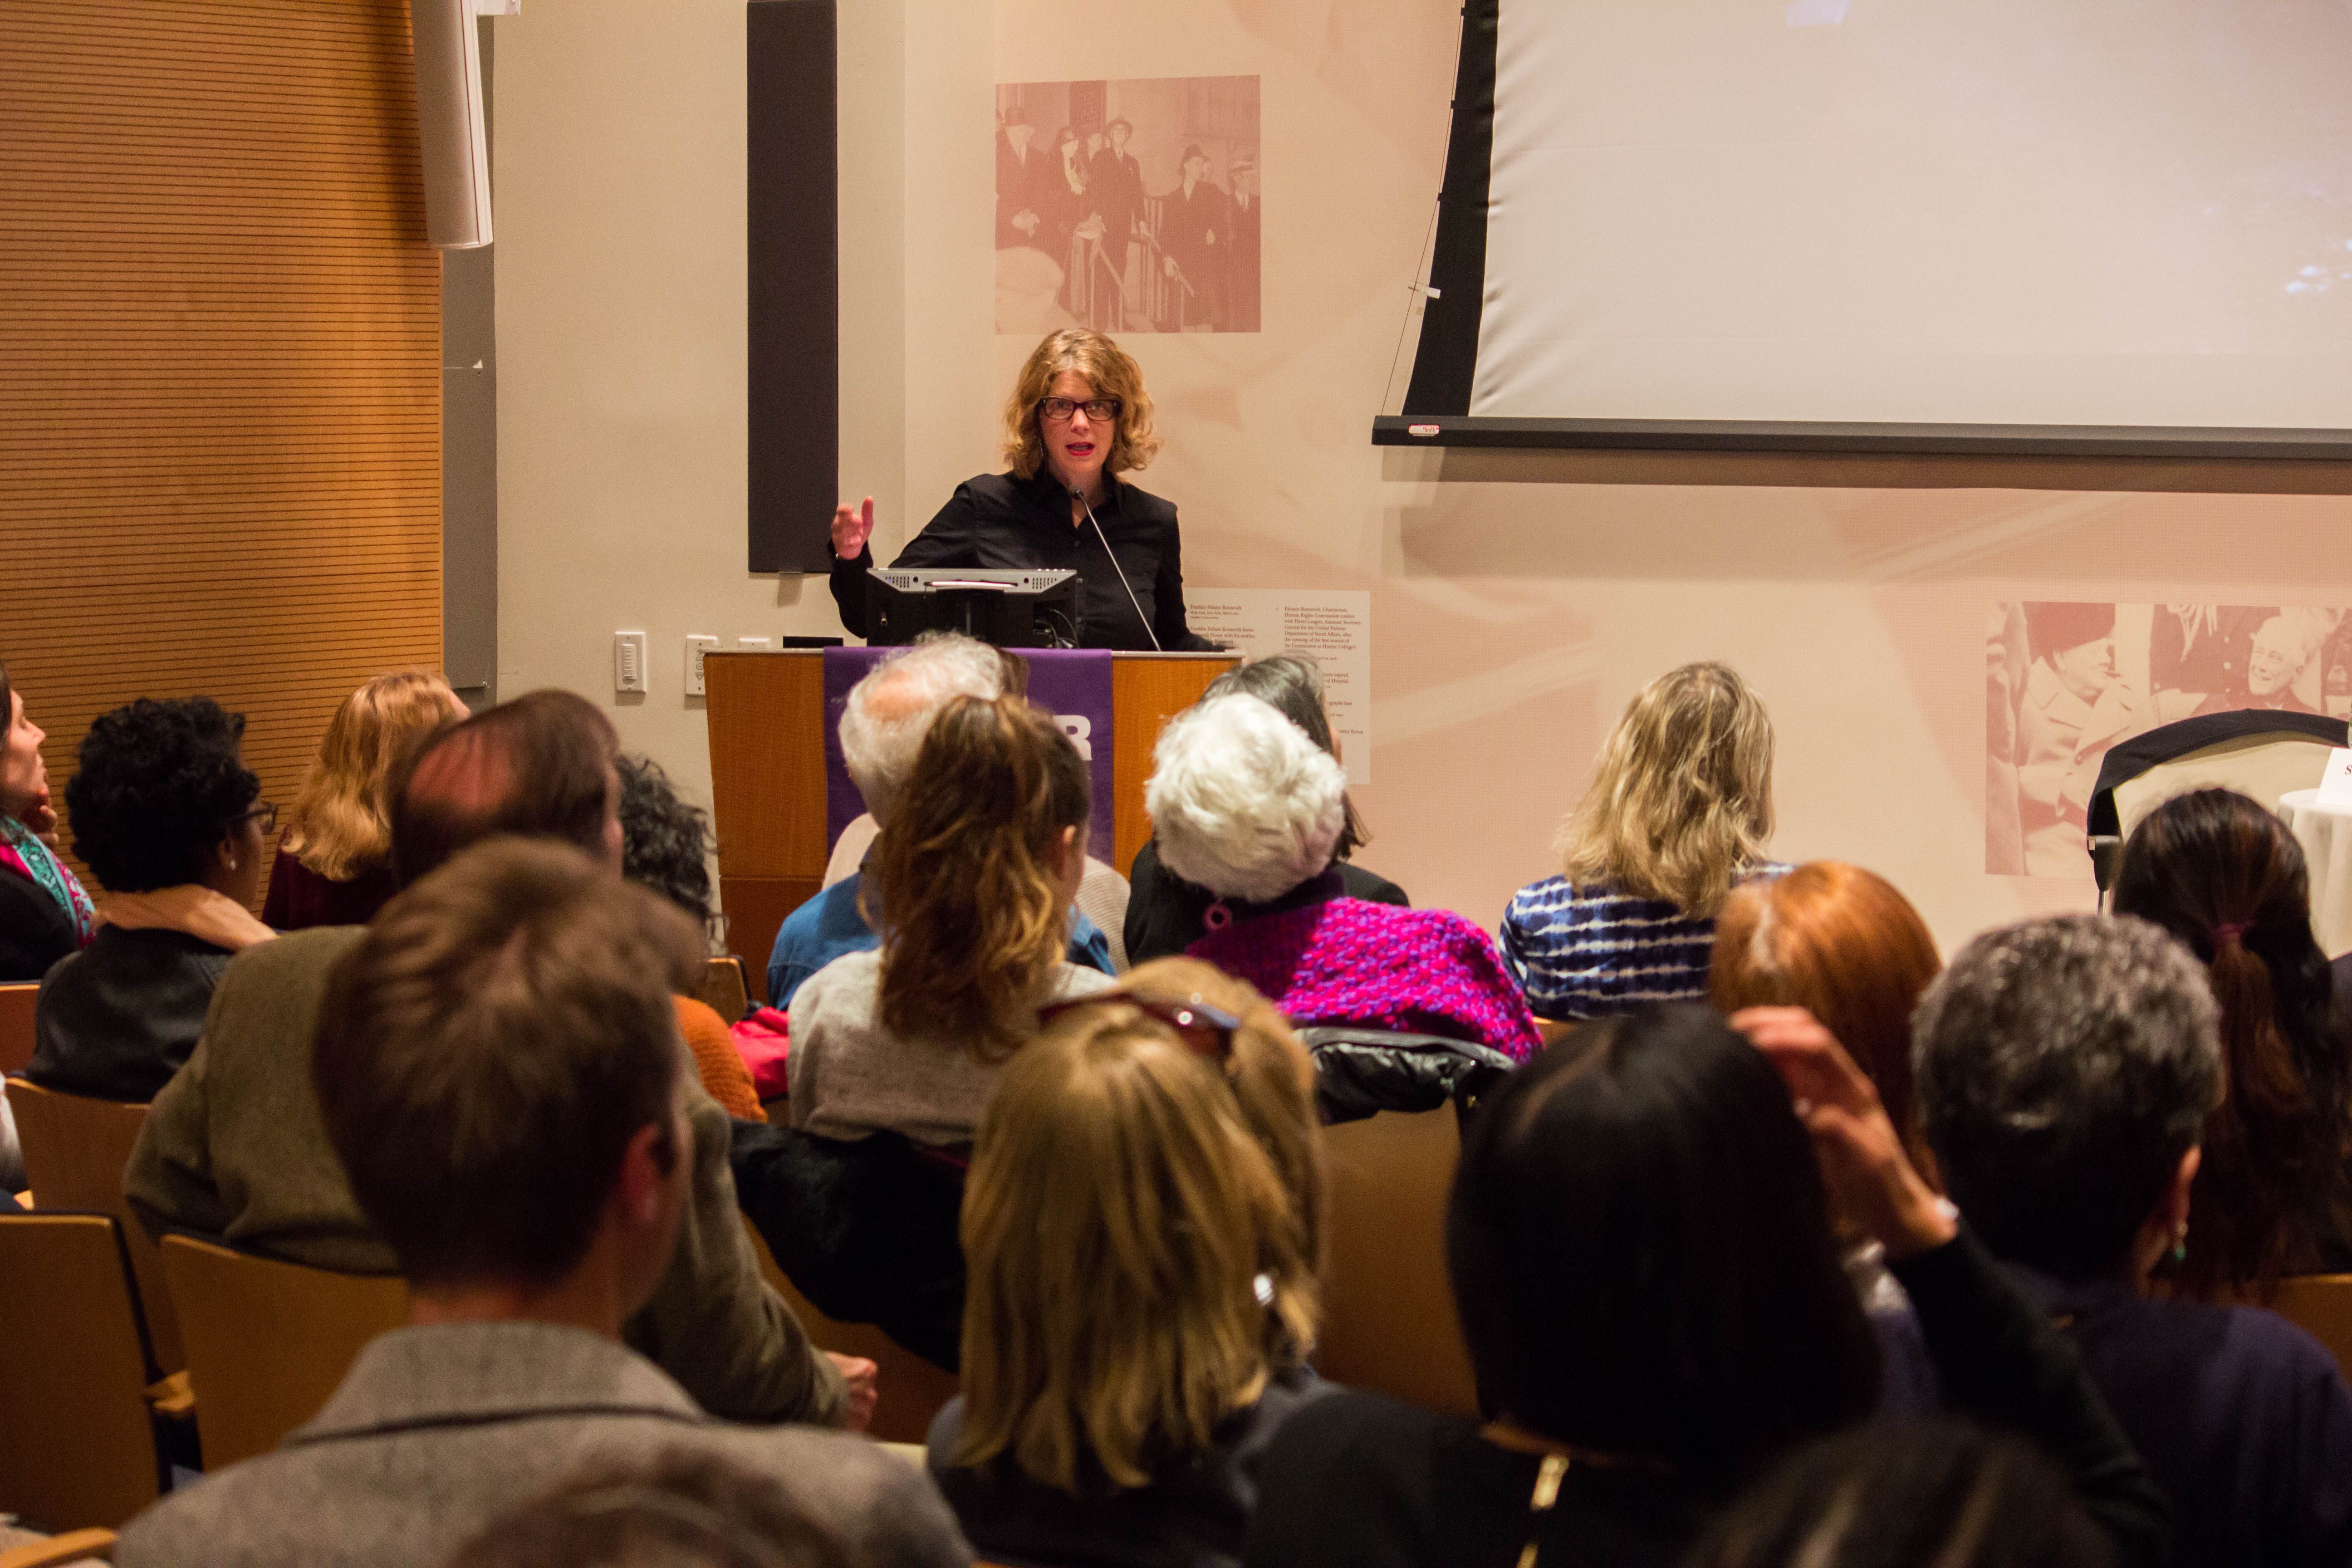 At the Roosevelt House in New York, Jeanne Carstensen presents her recent reporting focused on the island of Lesbos, an epicenter of the refugee flight, and on situations that may await refugees if they make it to Europe. Image by Lauren Shepherd. United States, 2017.